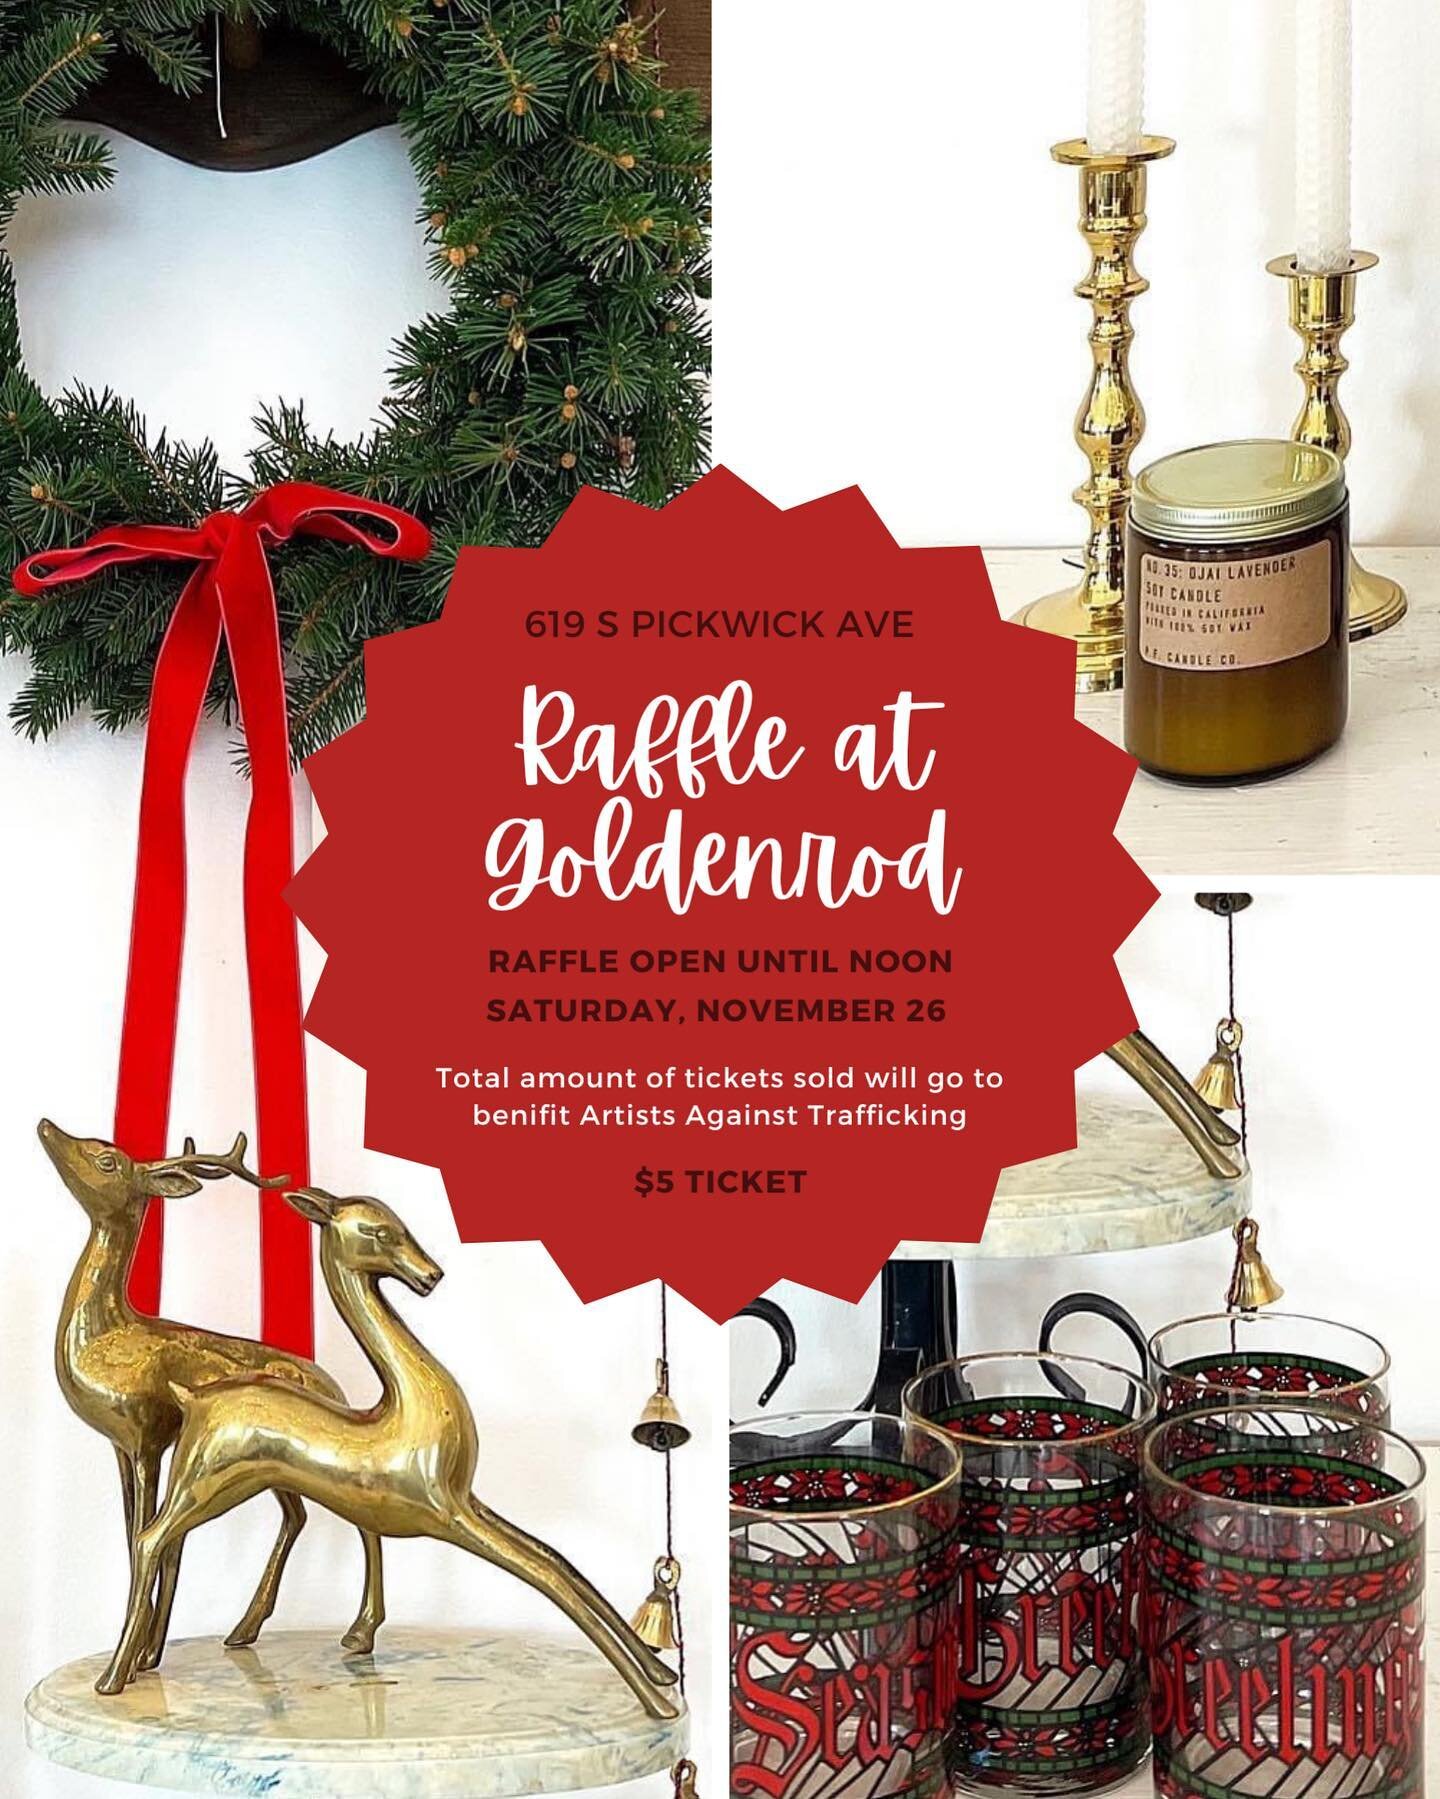 We are so grateful that @goldenrod_on_pickwick asked to raise money for Artists Against Trafficking during #smallbusinesssaturday with a raffle! Together the items are worth $310 and it&rsquo;s only $5 a ticket. 

Shop local at @goldenrod_on_pickwick